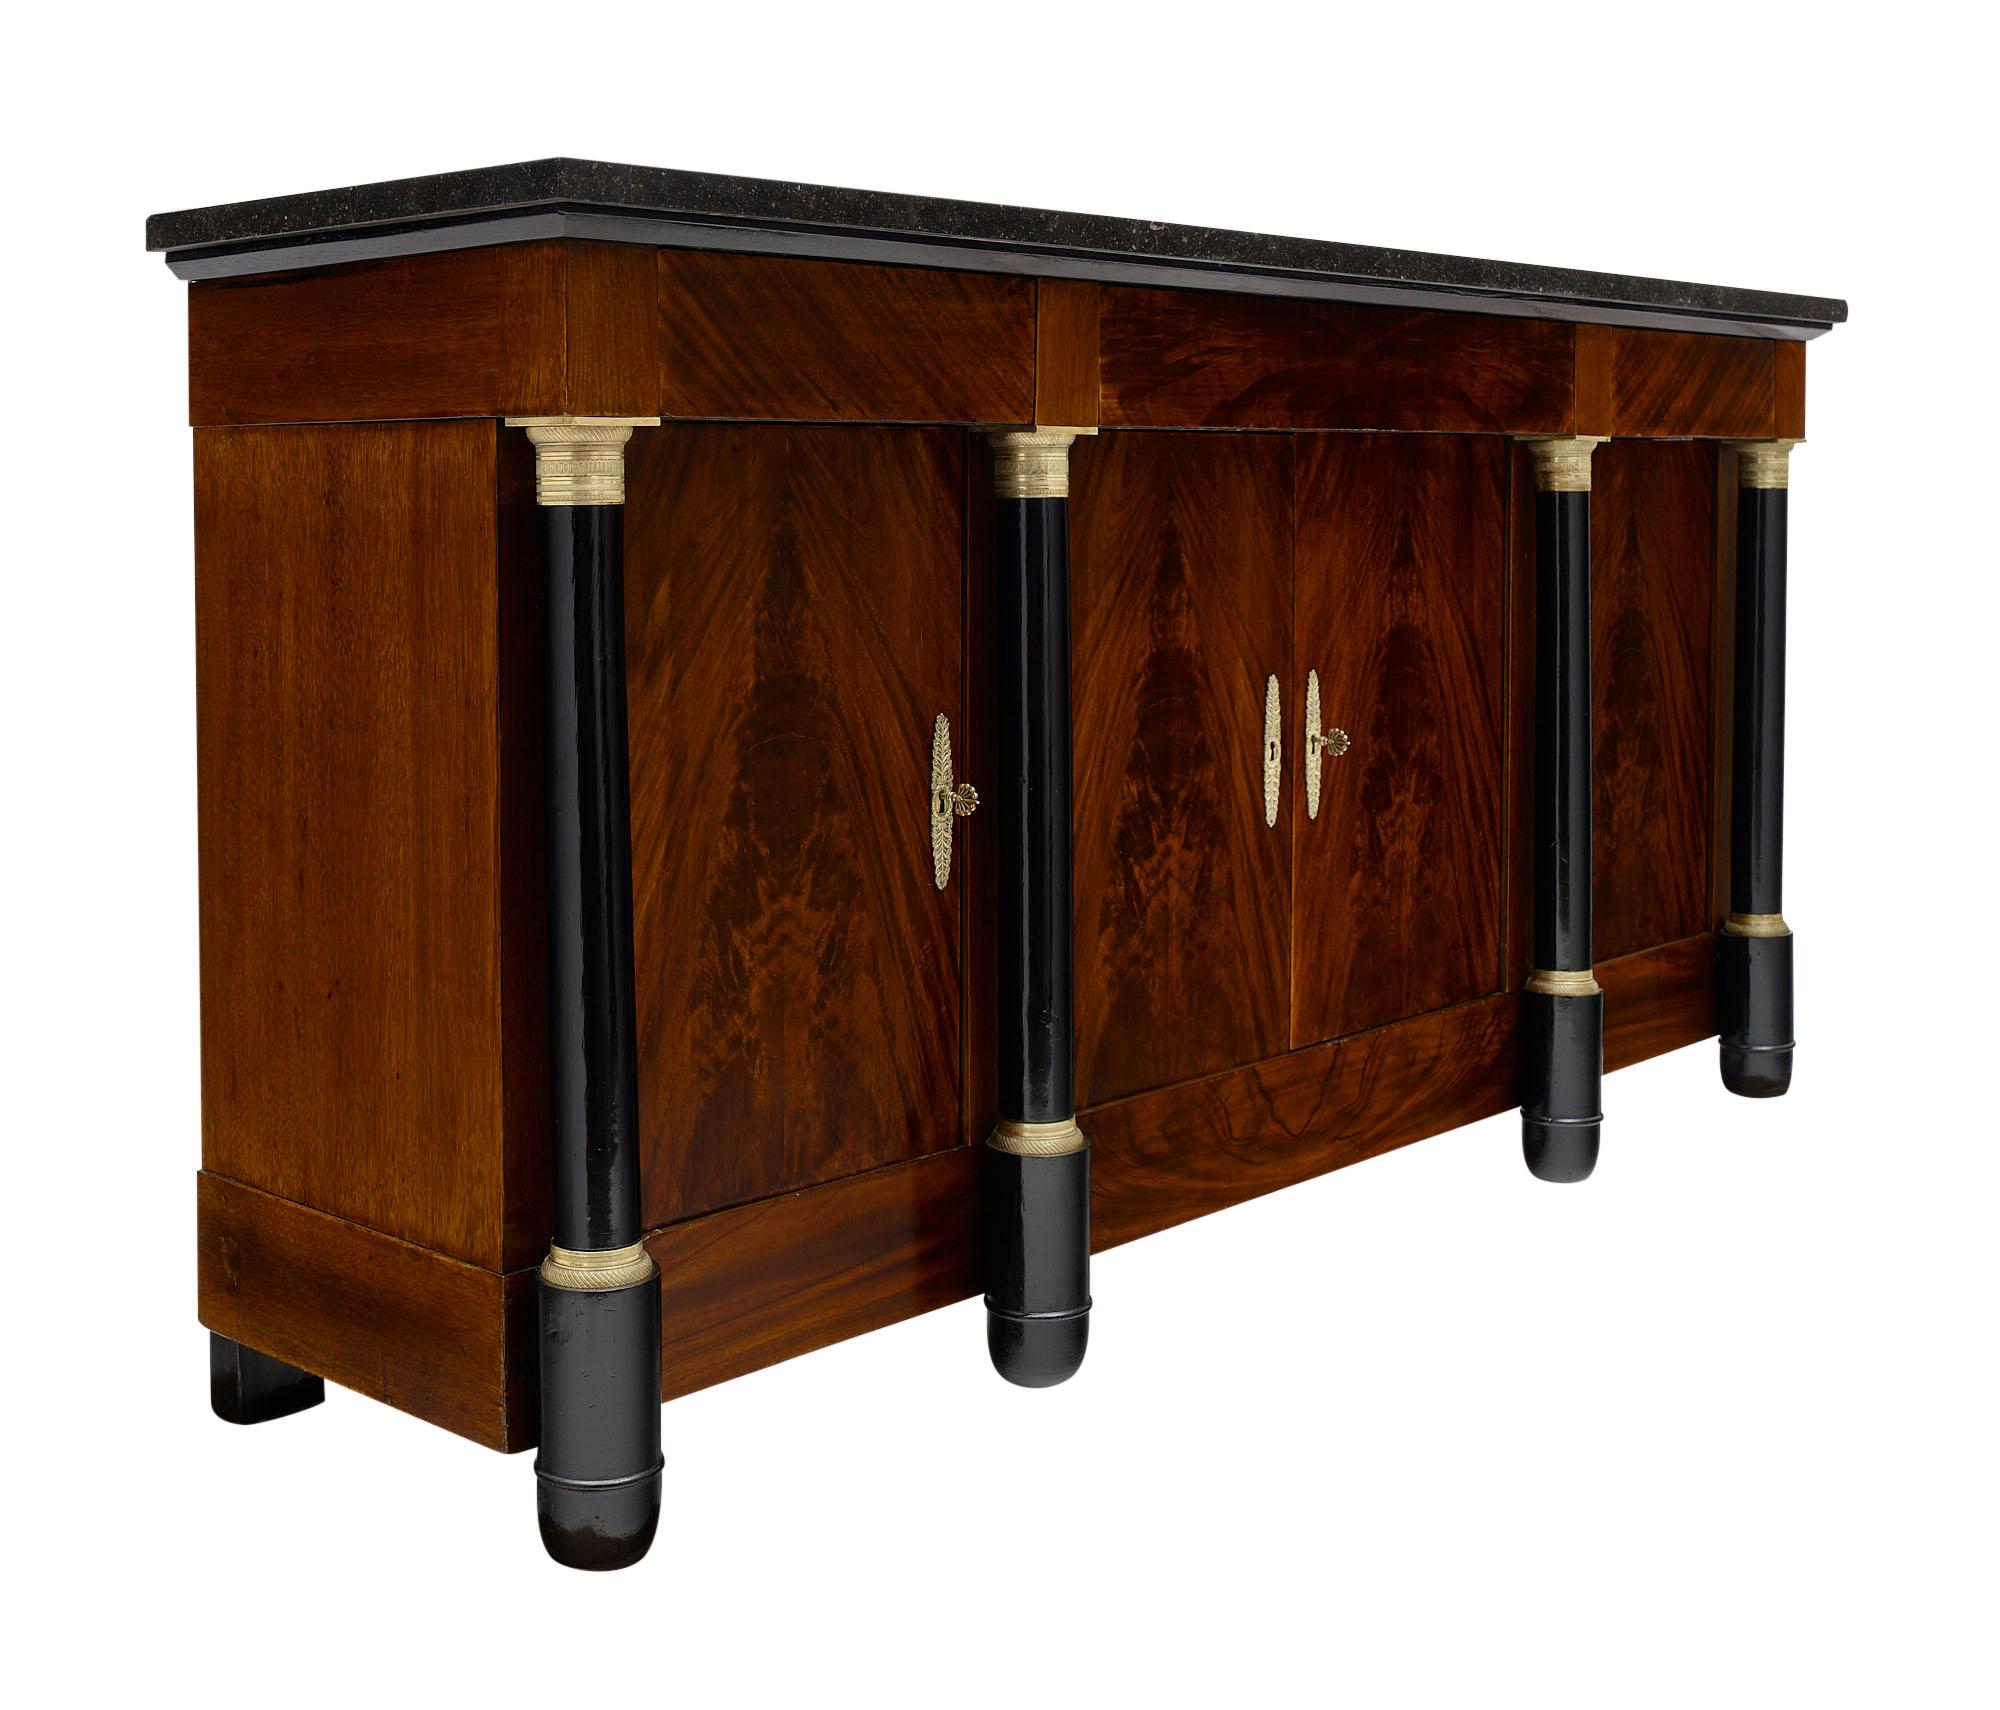 Empire style French antique buffet made of Cuban flamed mahogany finished in a lustrous Museum quality French polish. The columns are ebonized and feature finely cast gilt bronze hardware. The doors open to interior shelving and are topped by three